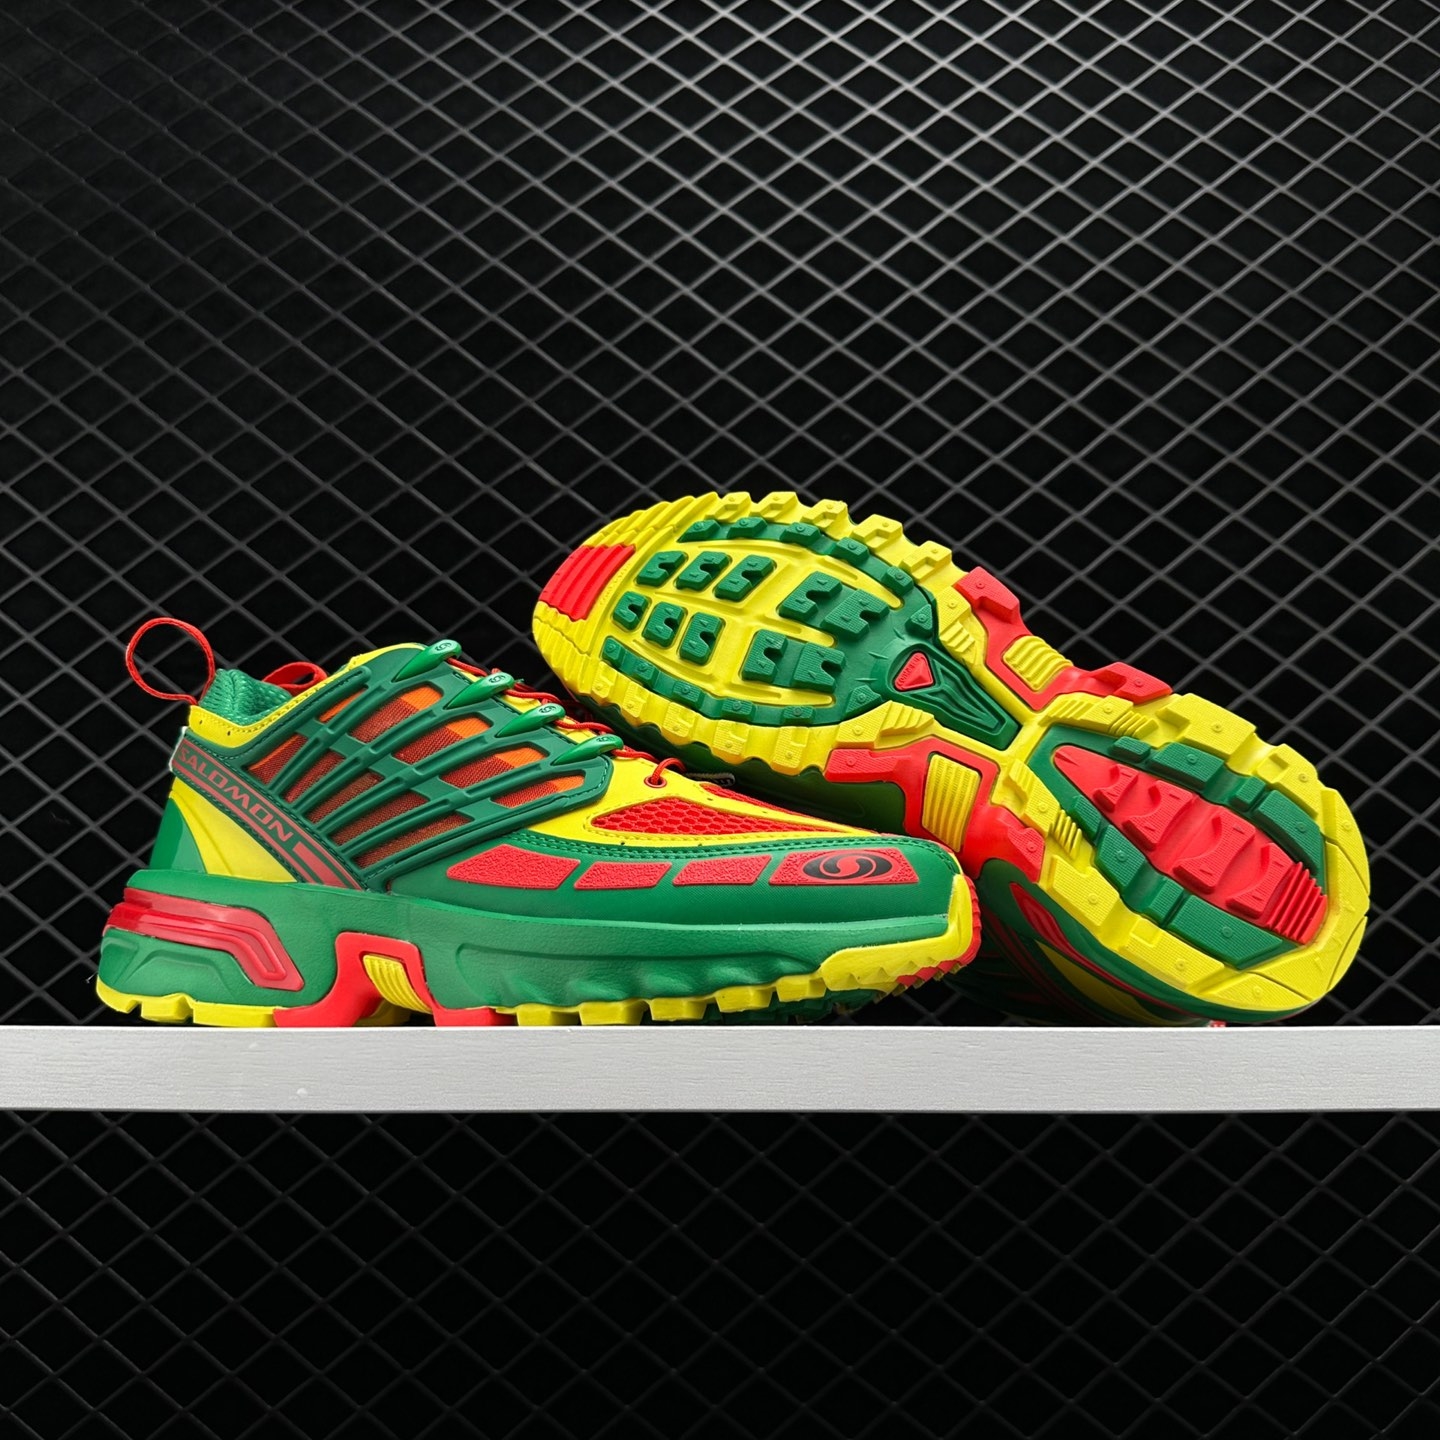 Salomon ACS PRO Advanced Kar L'Art De L'Automobile Green Red Yellow L41717300 - High-performance auto-inspired sneakers for style and durability.